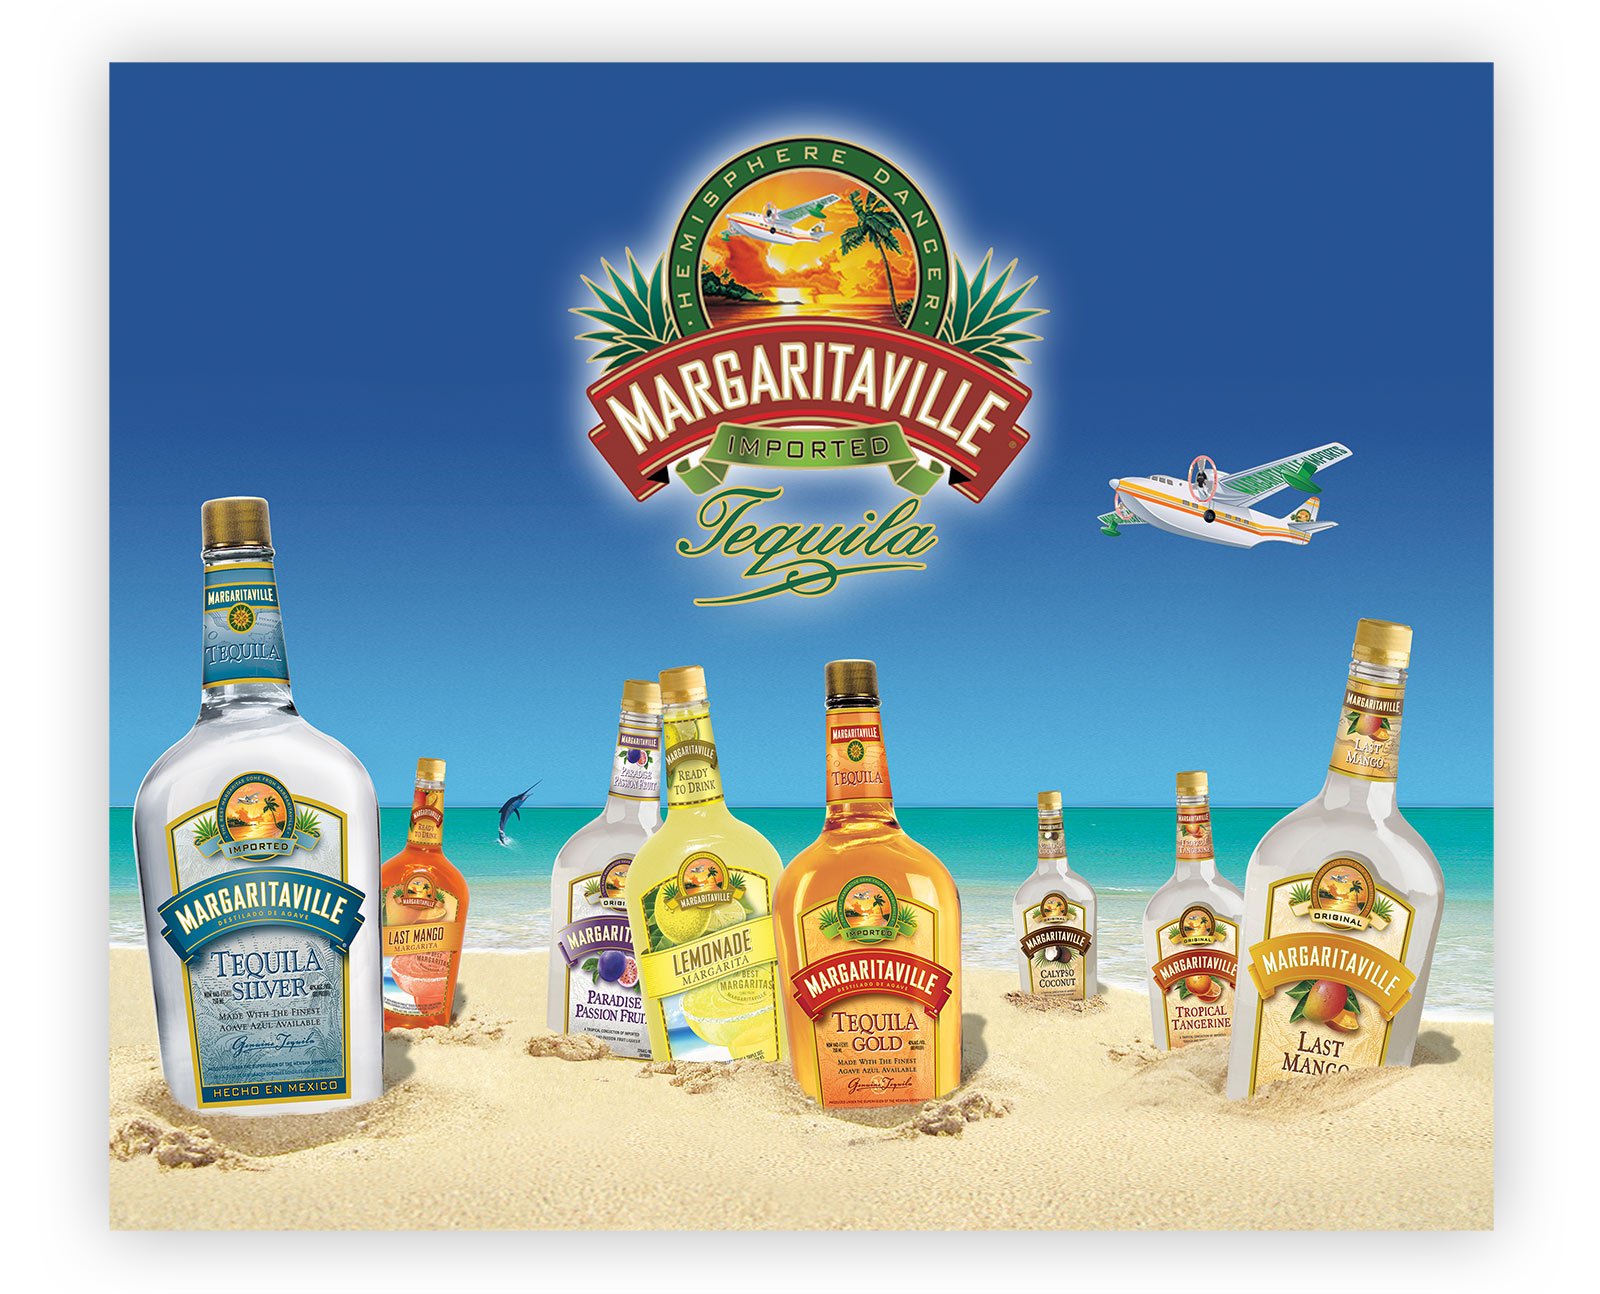 High-quality print and advertising for the spirits industry, depicting: Margaritaville.